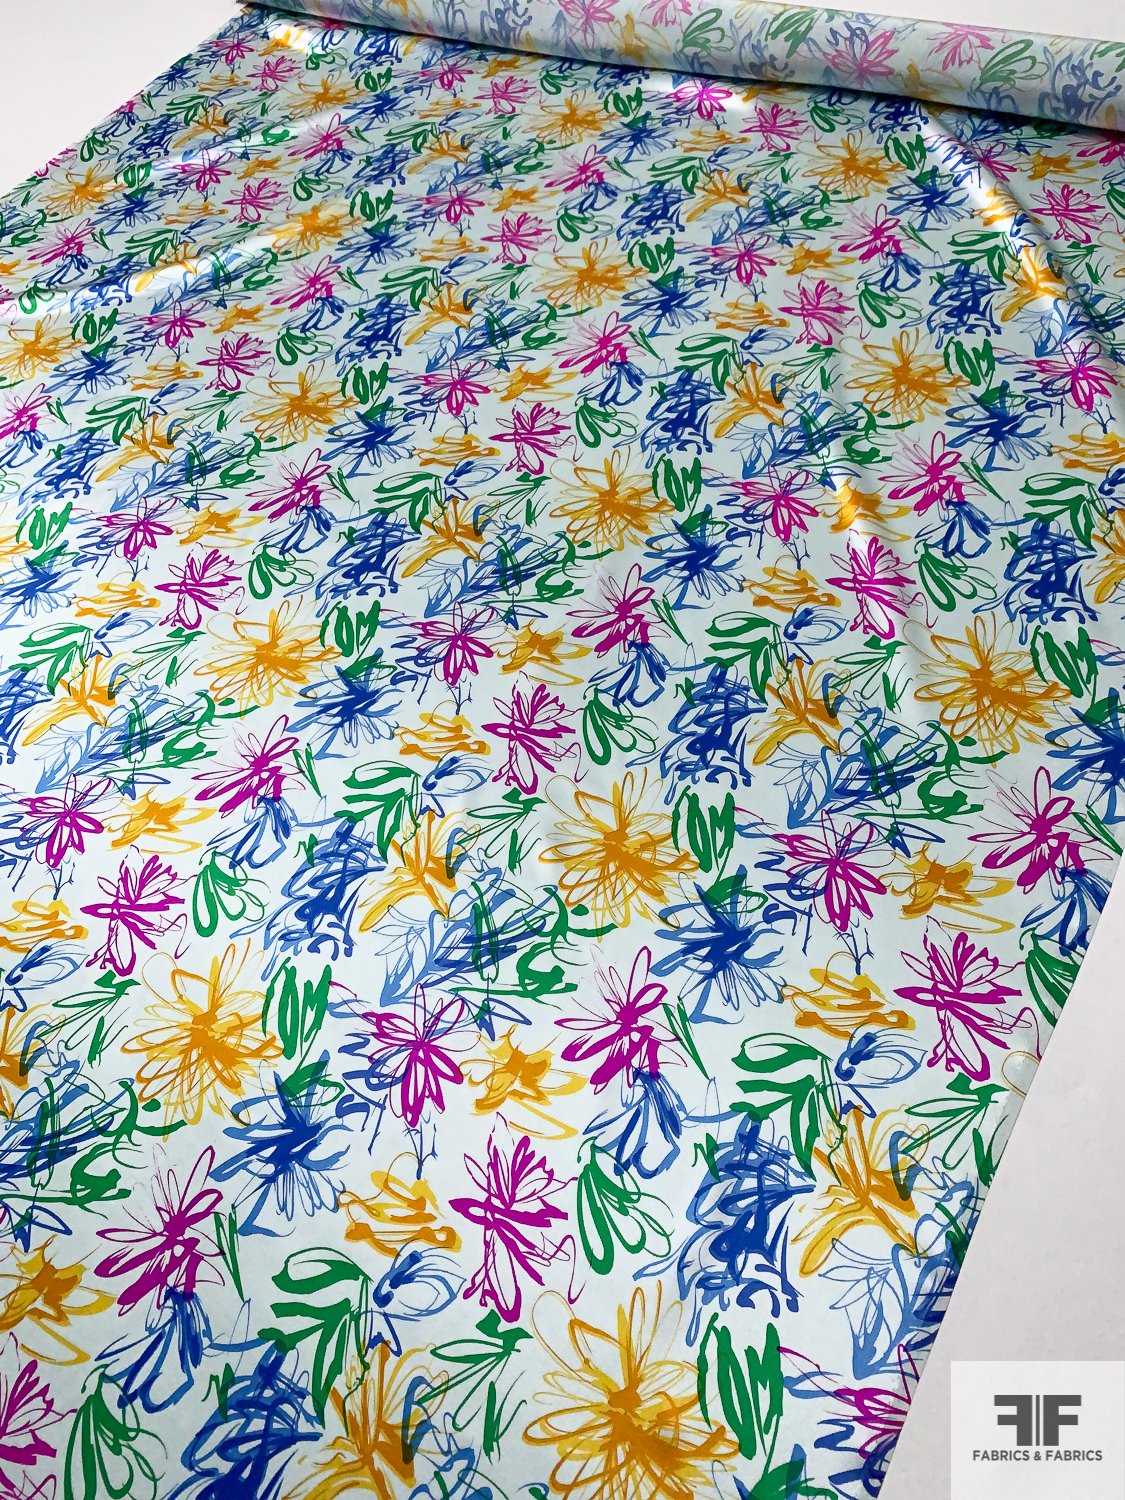 Painterly Floral Sketch Printed Silk Charmeuse - Light Seafoam / Blue / Magenta / Yellow / Green